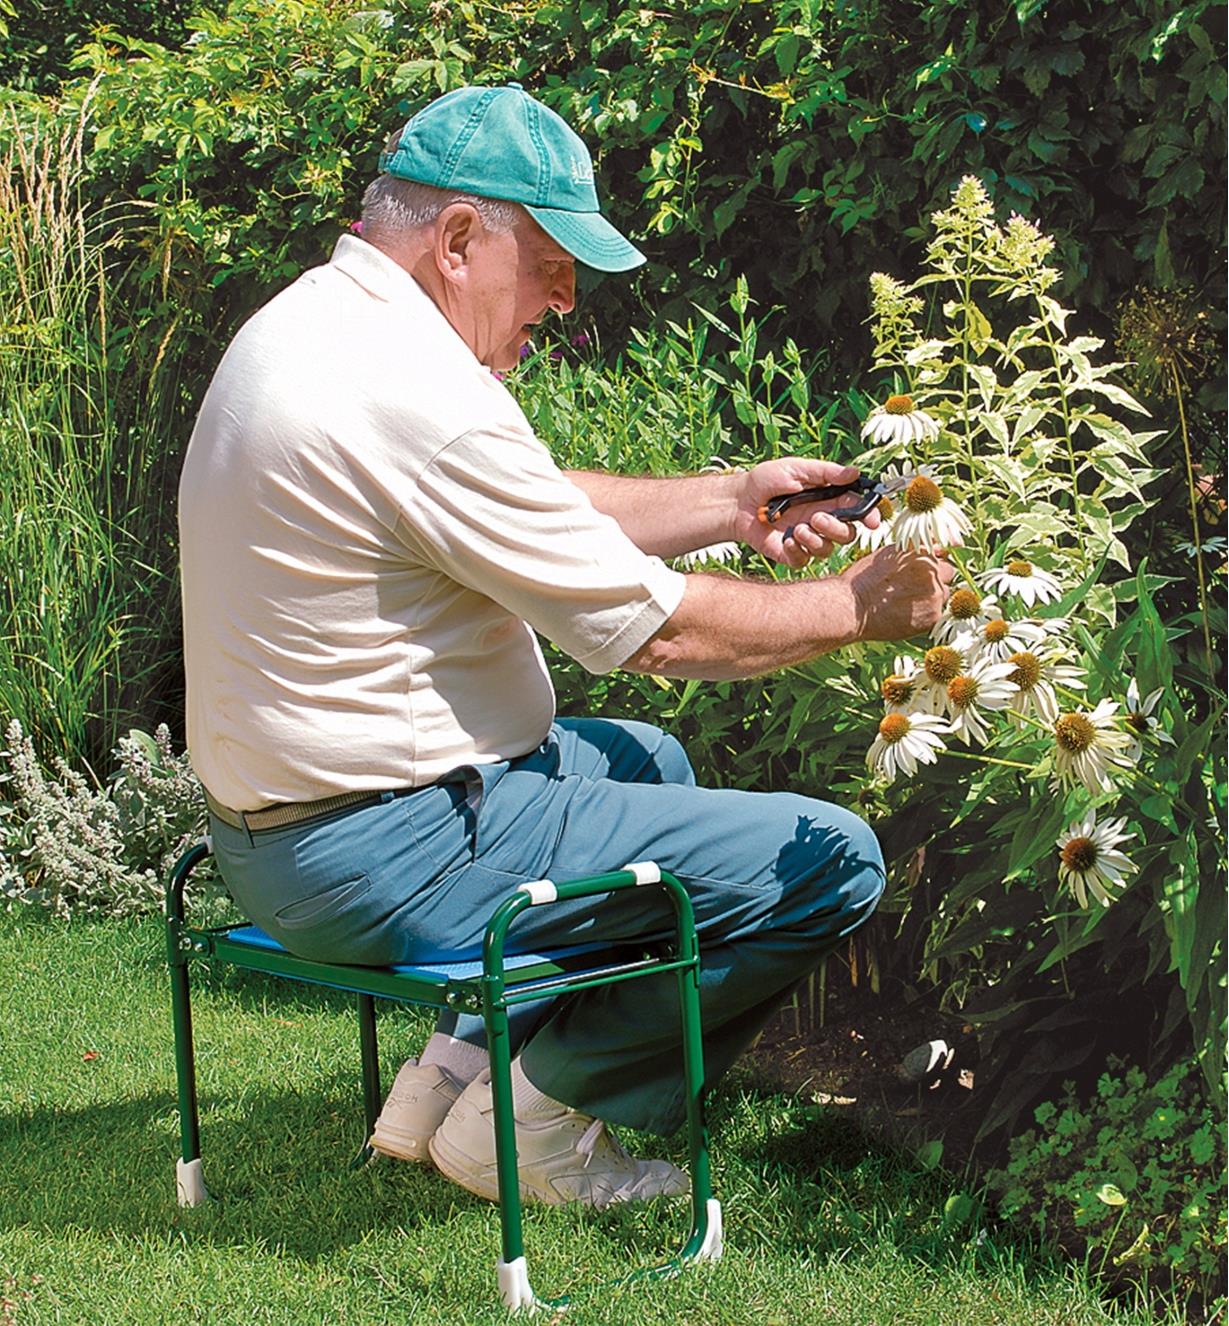 A man sits on the folding kneeler stool while cutting flowers